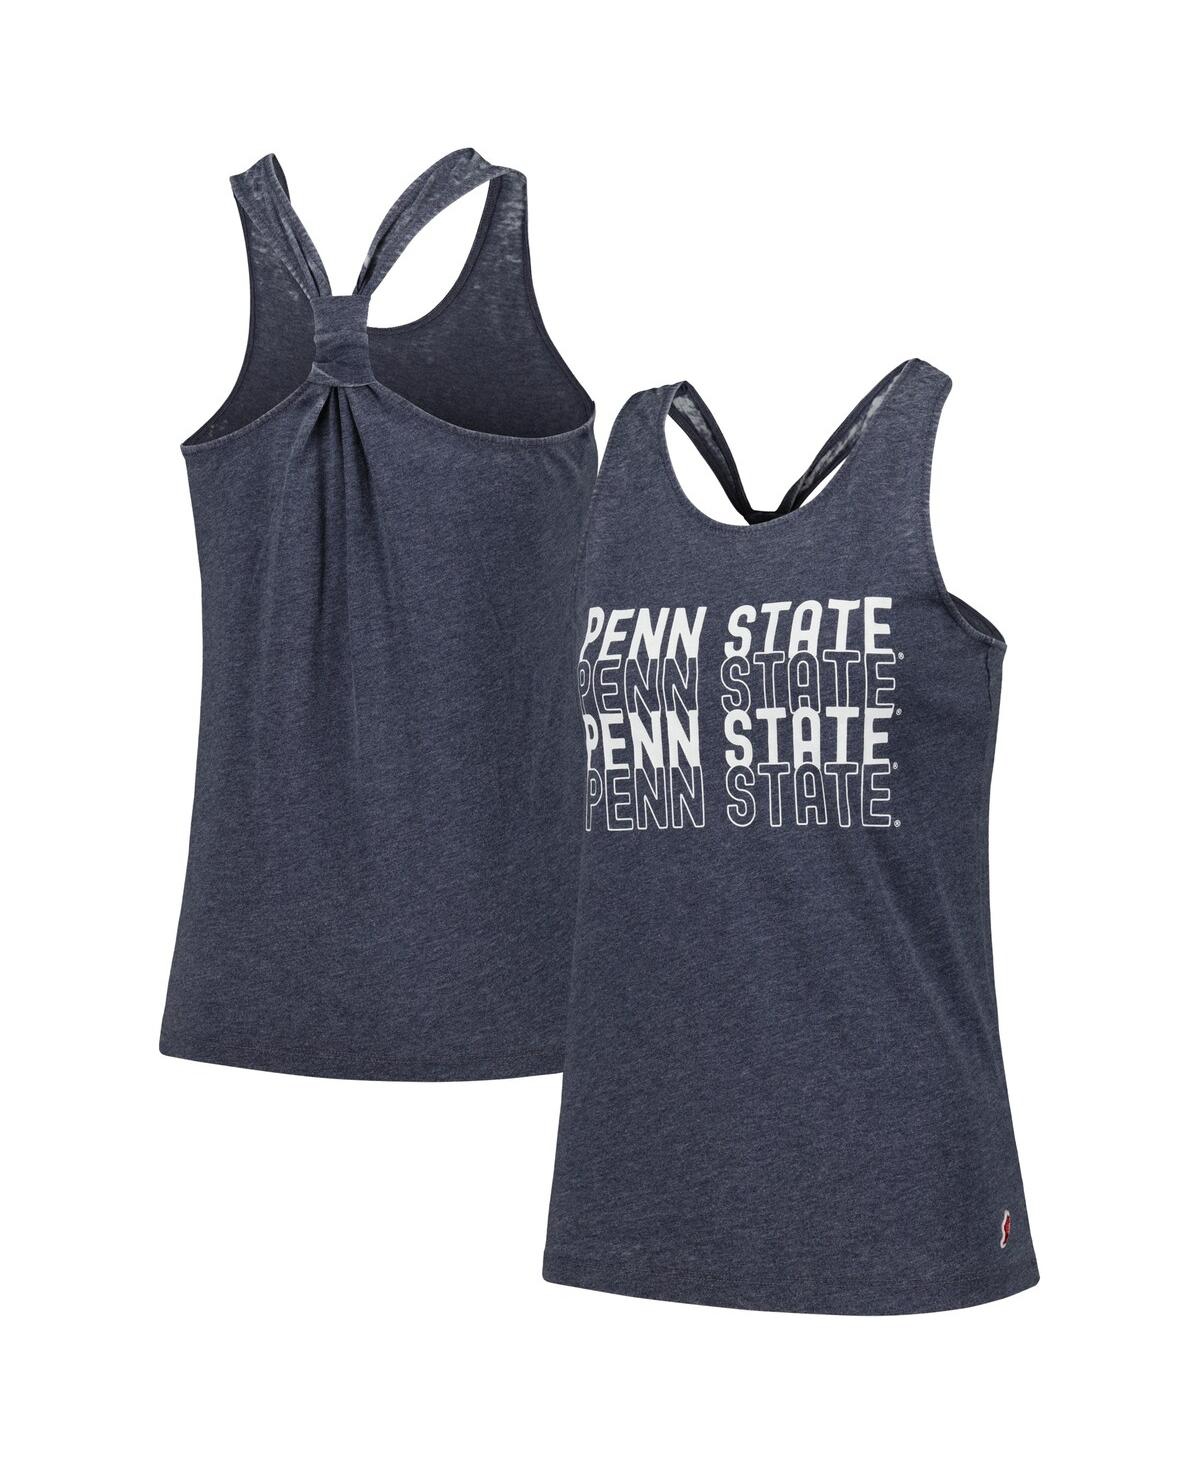 League Collegiate Wear Women's  Navy Penn State Nittany Lions Stacked Name Racerback Tank Top